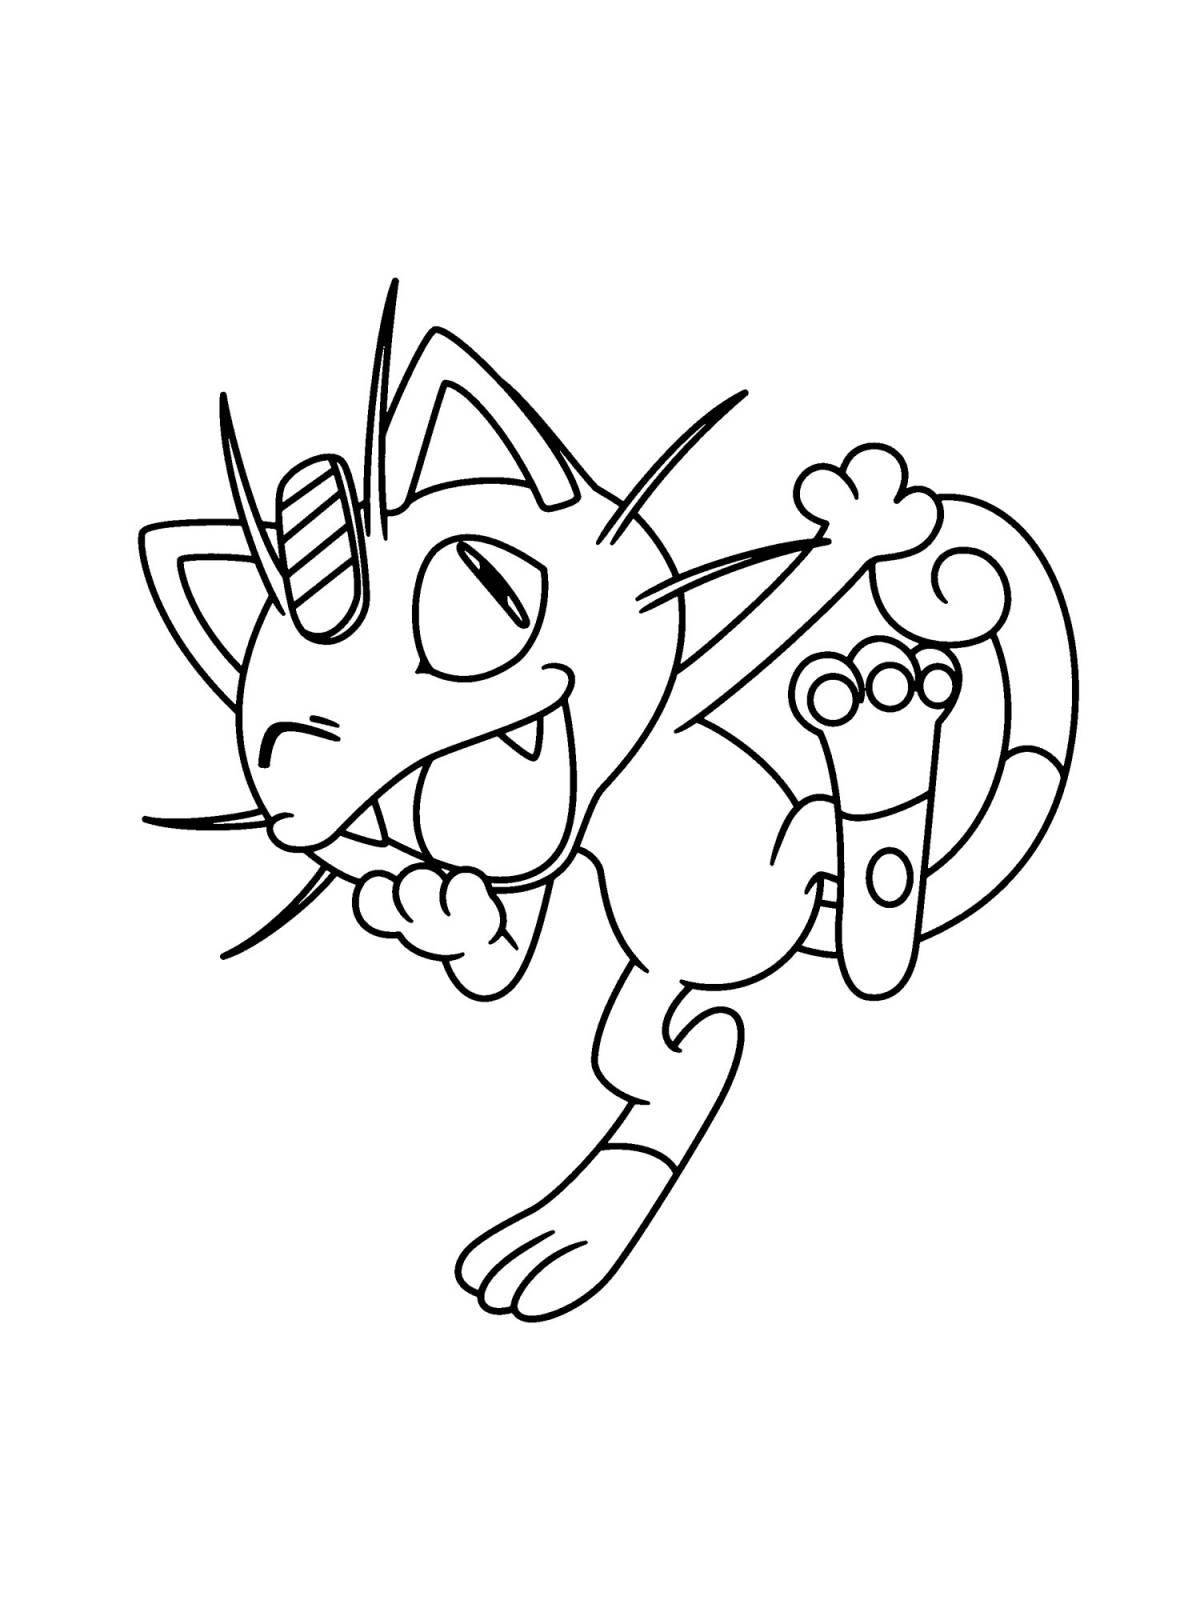 Coloring bright meowth